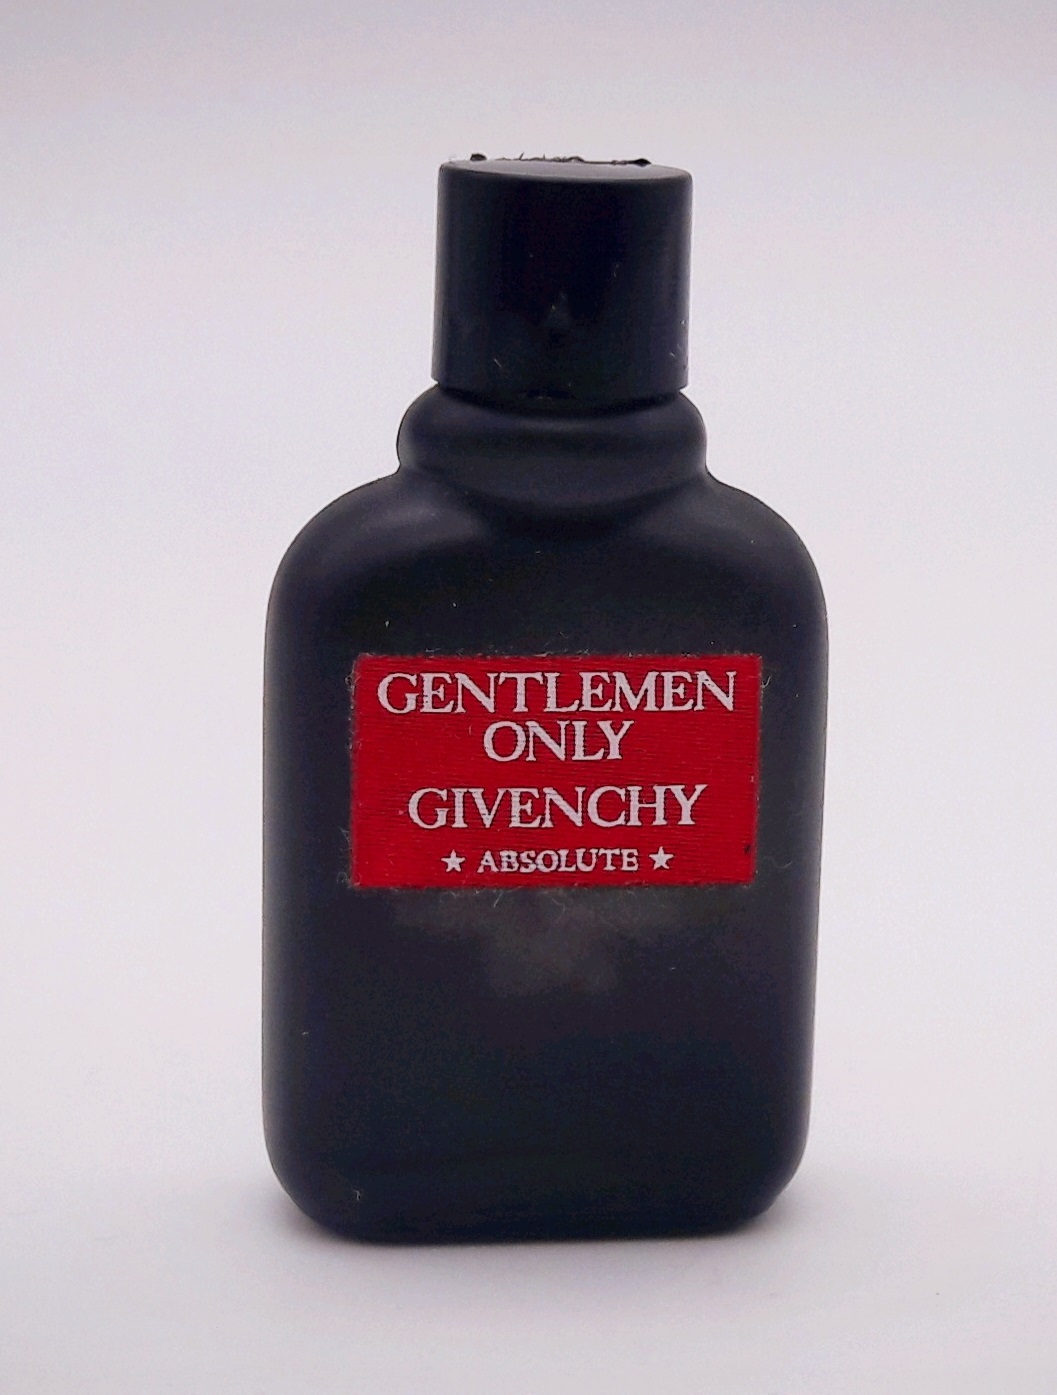 Only absolute. Givenchy Gentlemen only absolute 100 ml тестер. Gentleman миниатюра. Миниатюра живанши.